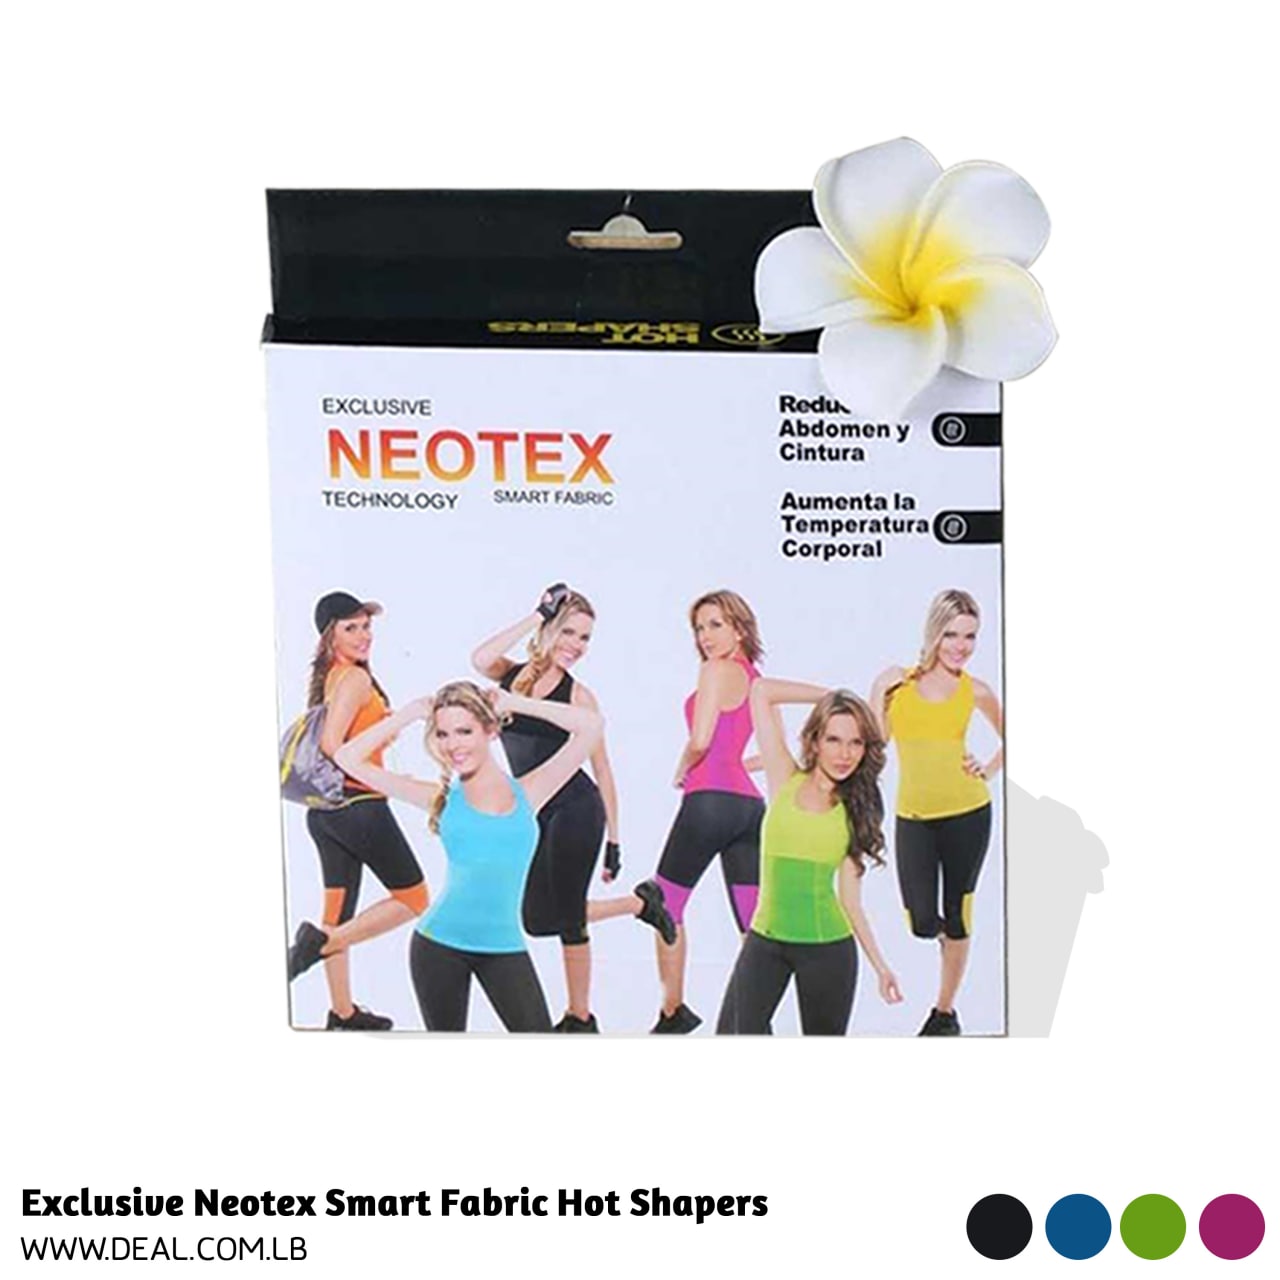 Exclusive Neotex Smart Fabric Hot Shapers